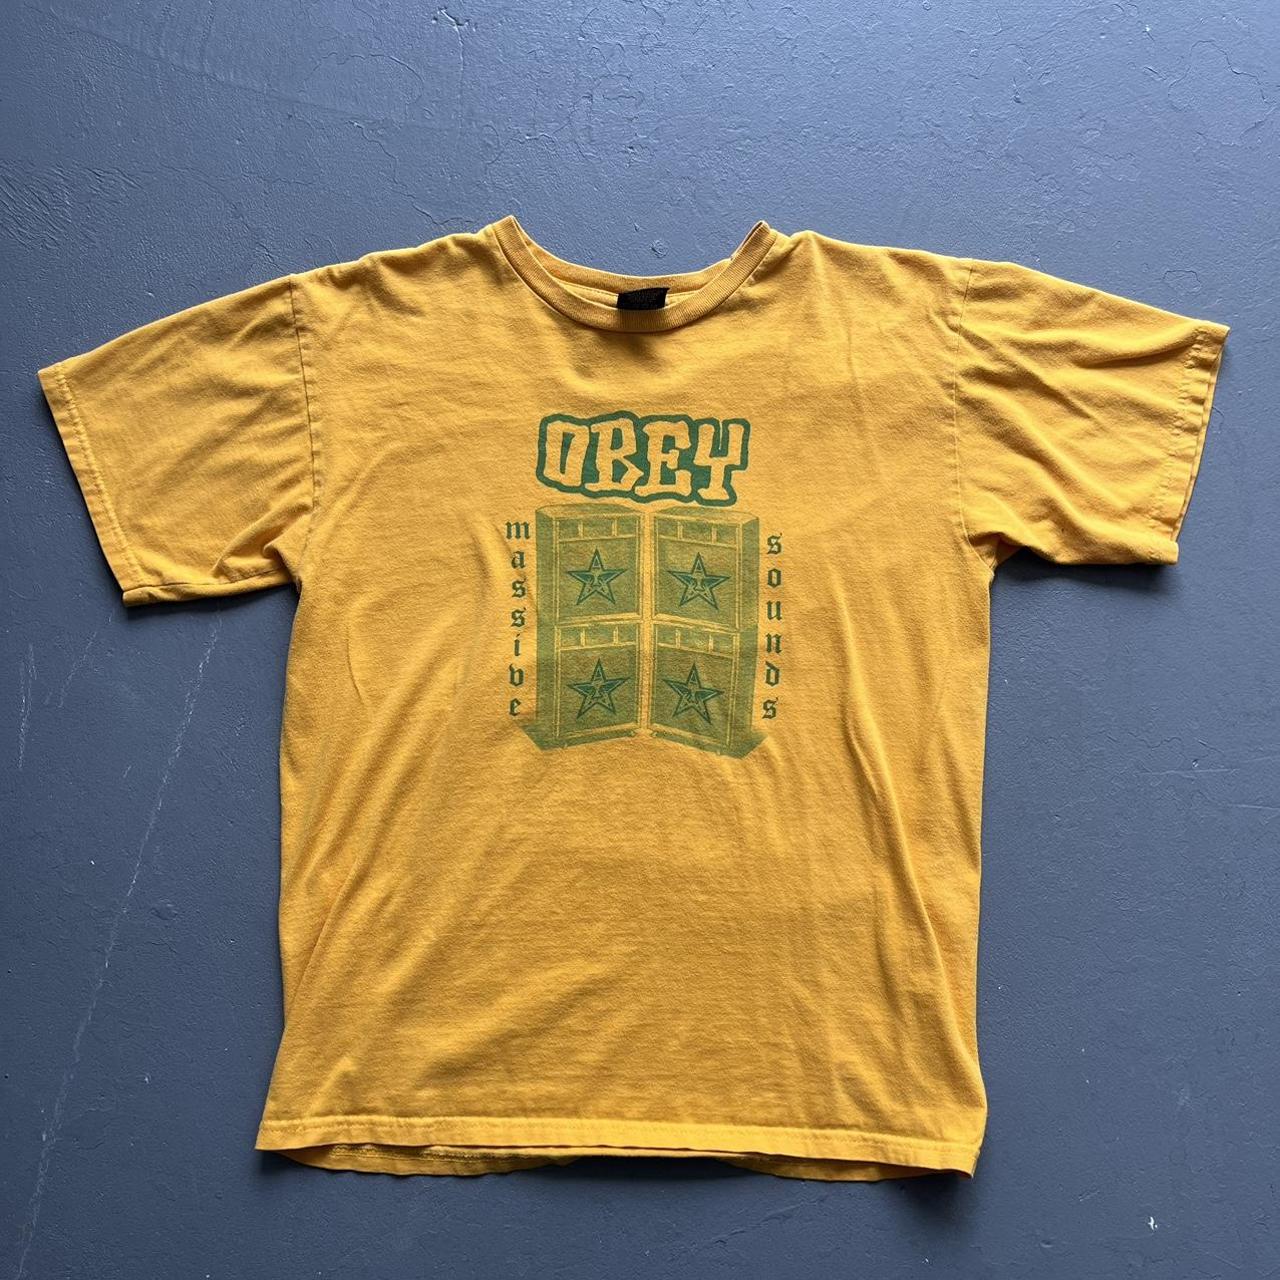 Obey Men's Yellow and Green T-shirt